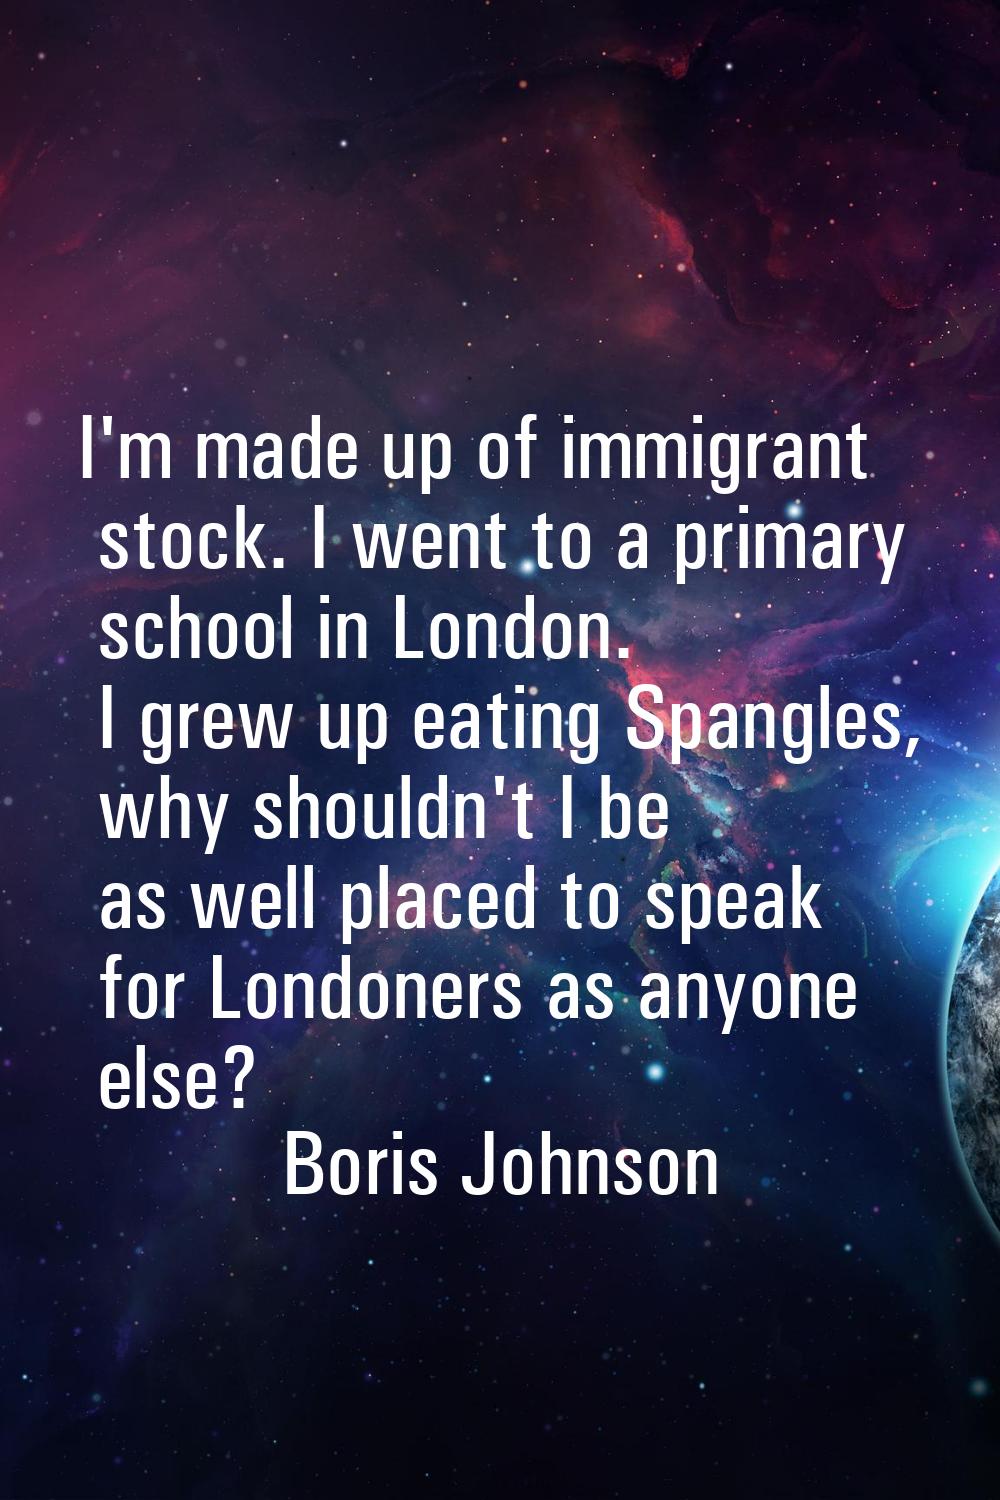 I'm made up of immigrant stock. I went to a primary school in London. I grew up eating Spangles, wh